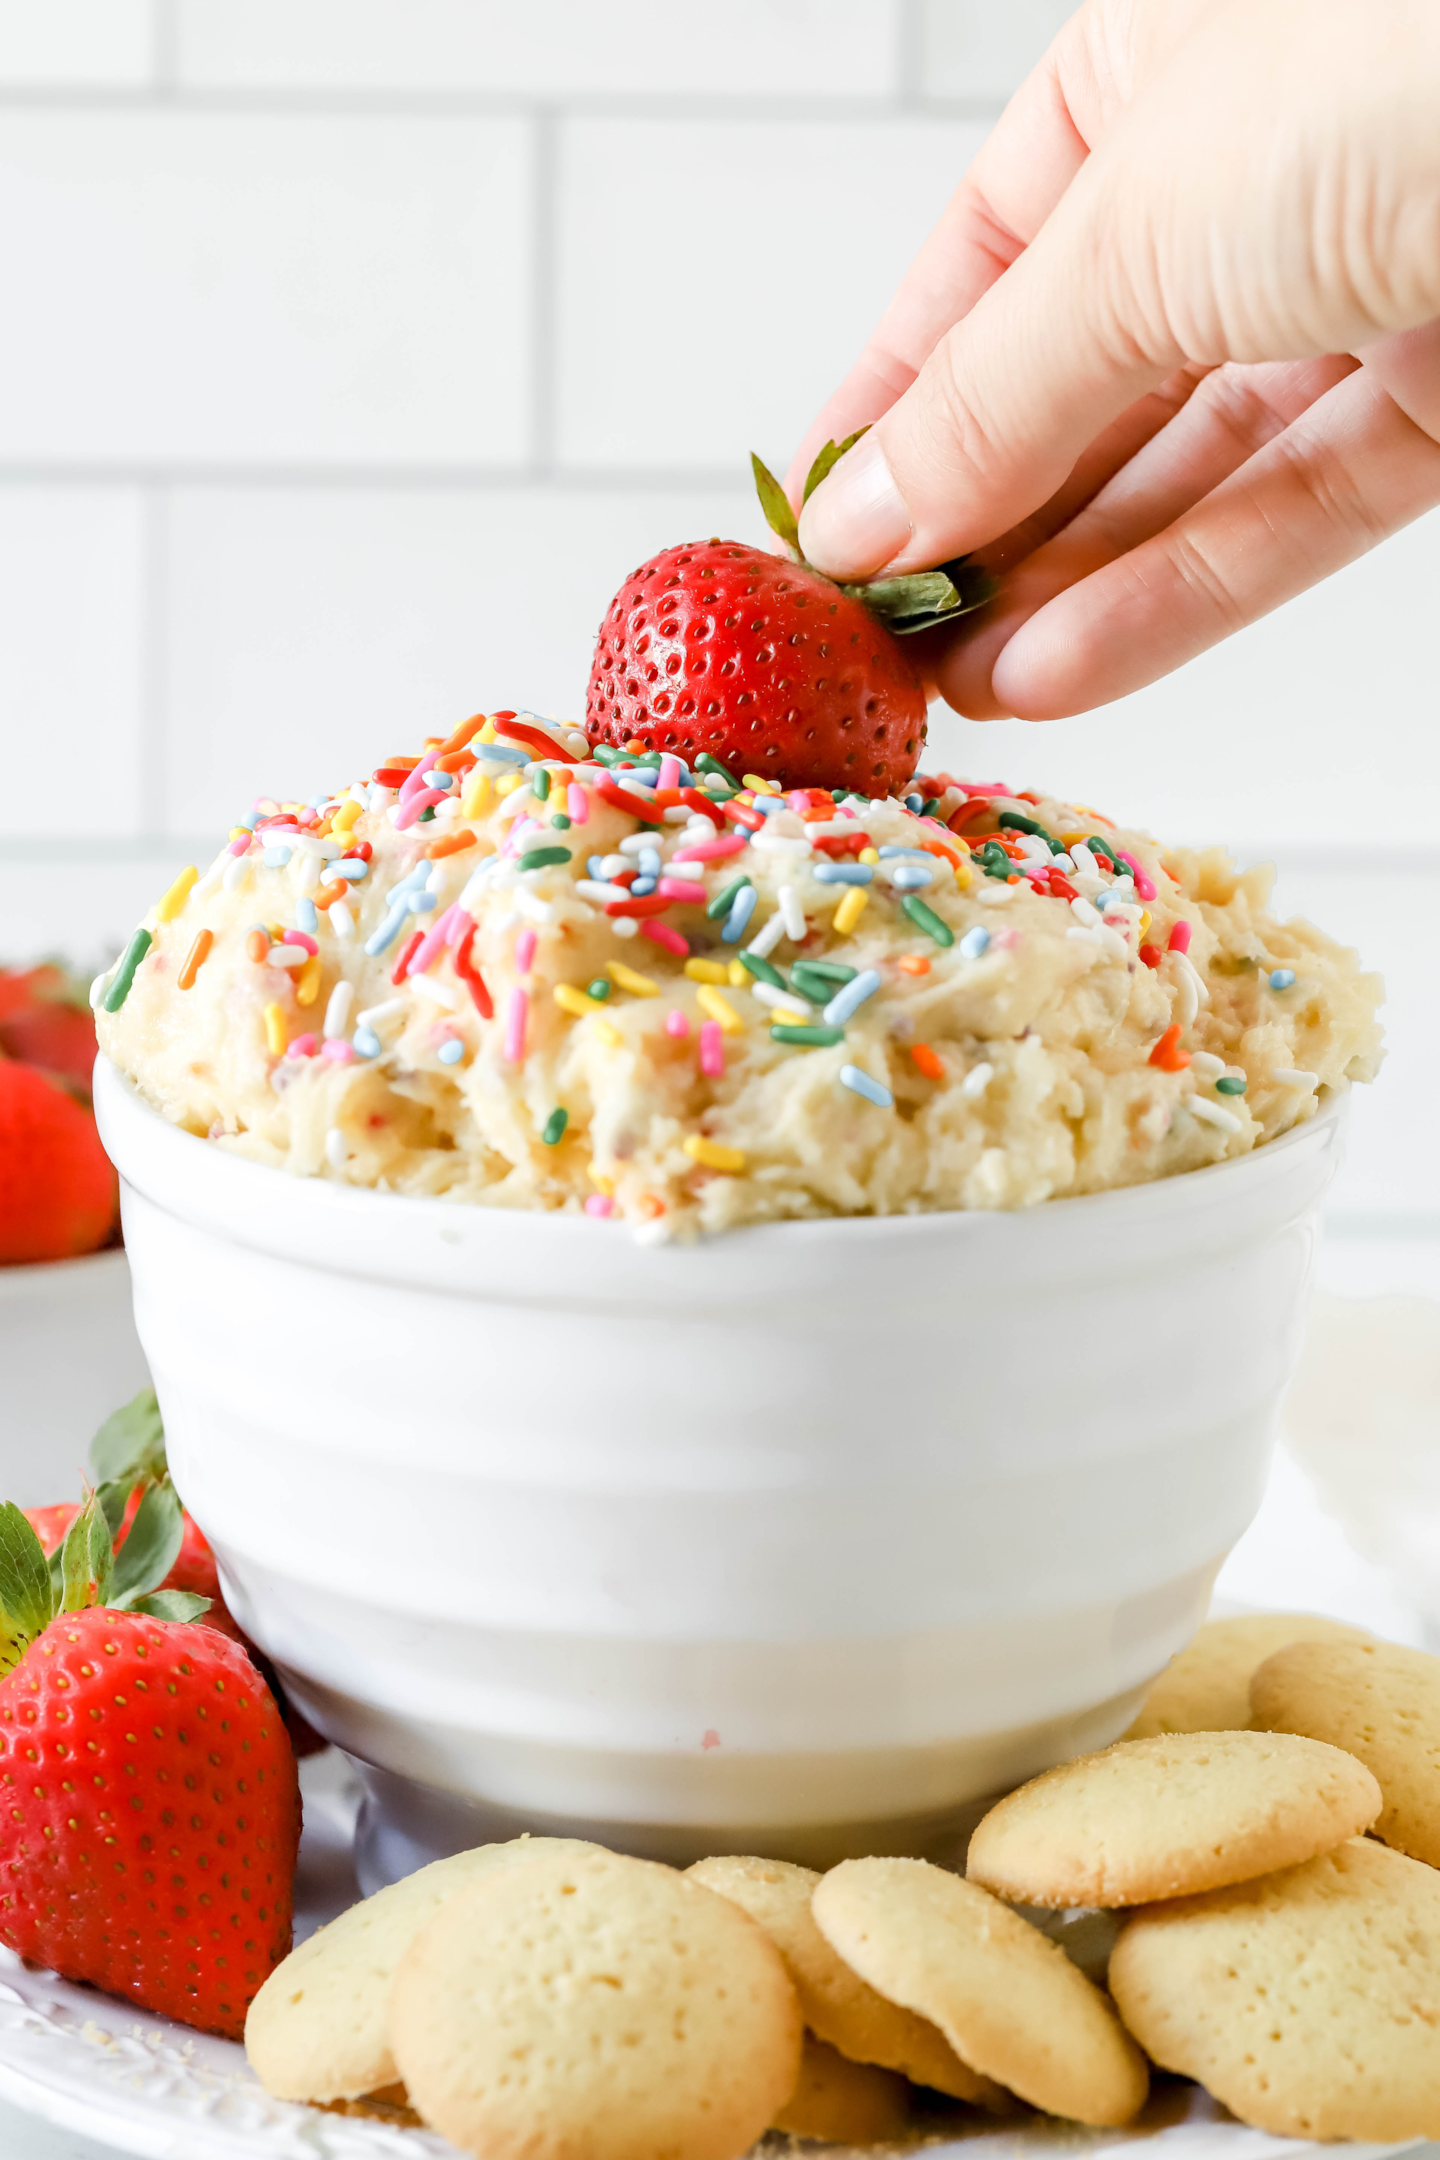 strawberry being dipped into a bowl of cake batter dip